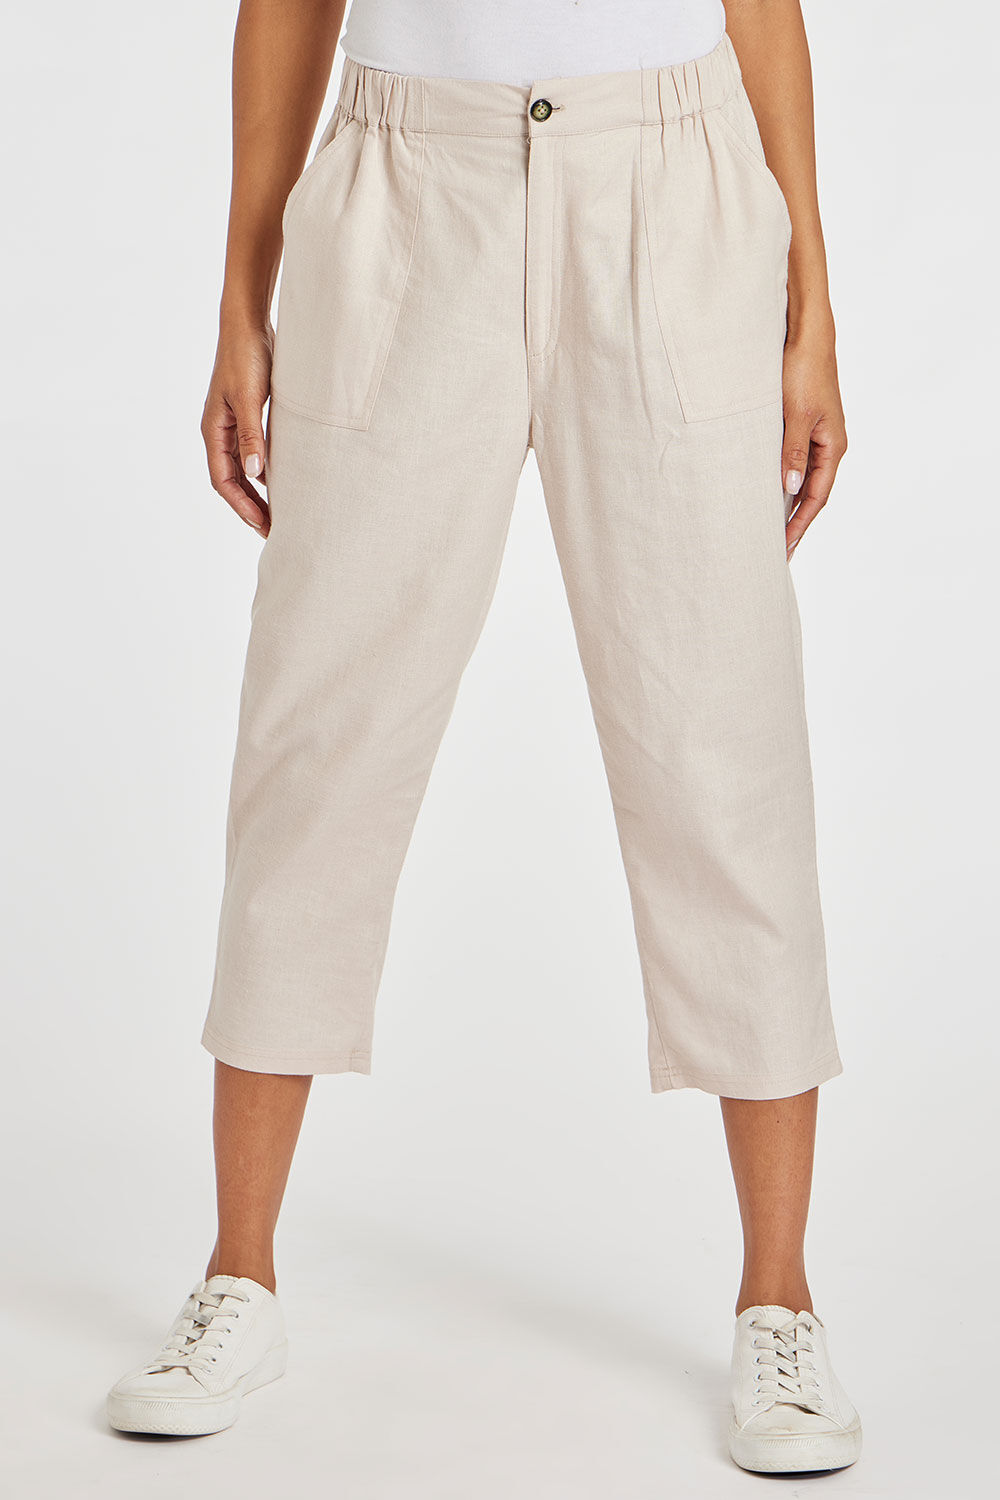 Bonmarche Stone Tapered Cropped Linen Trousers With Button Detail, Size: 10 - Summer Trousers